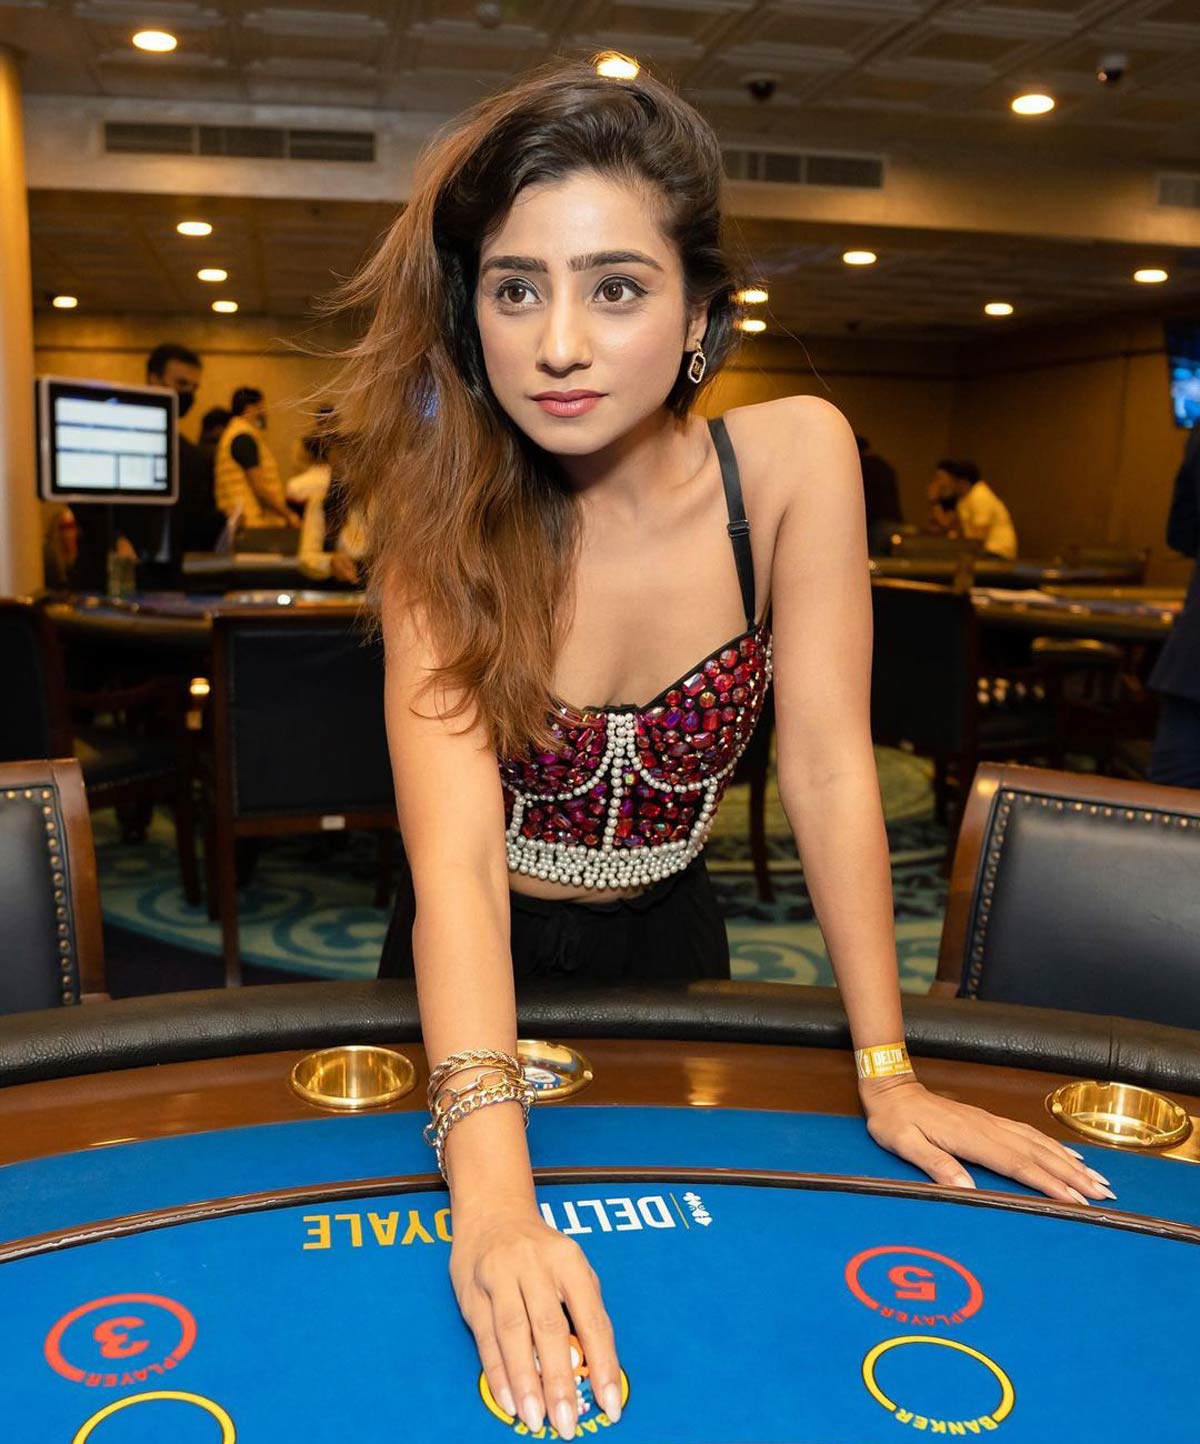 What To Wear To A Casino -